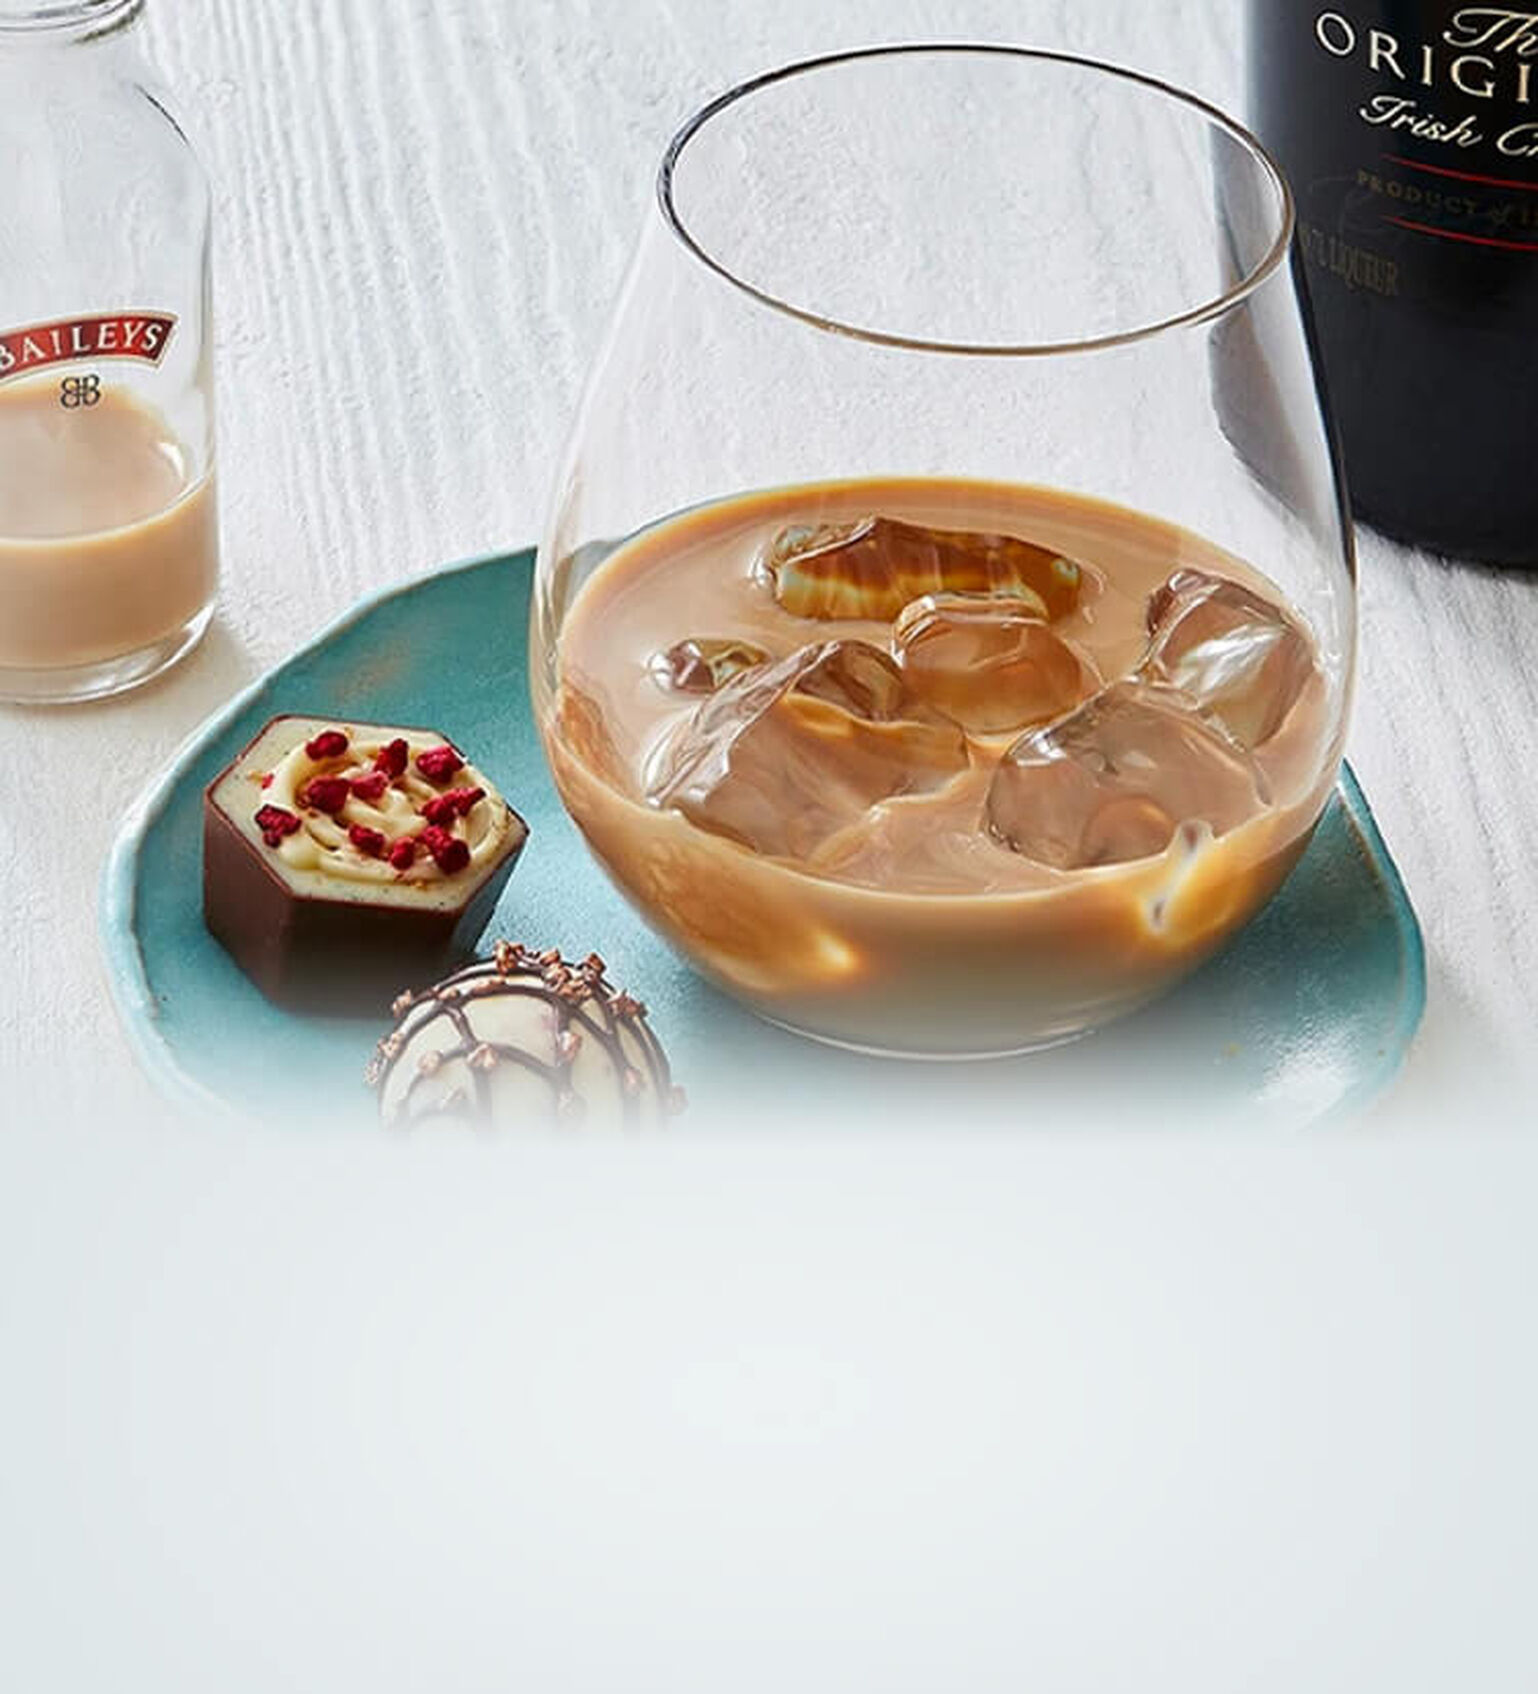 Image of a Cognac Old Fashioned on a mirrored surface